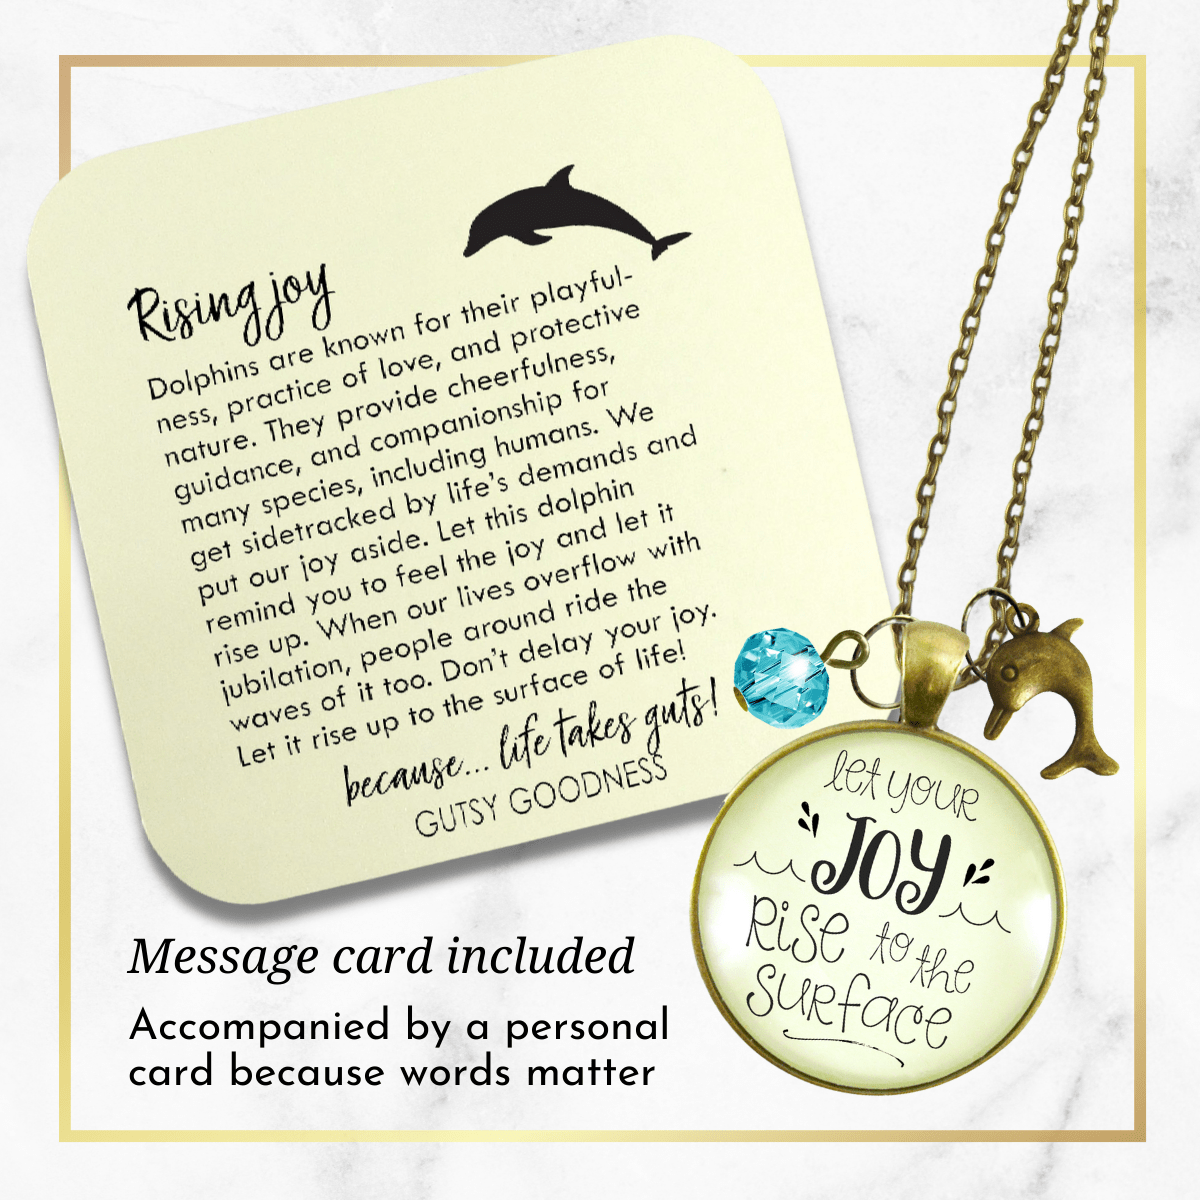 Gutsy Goodness Dolphin Necklace Let Your Joy Rise Positive Mantra Jewelry Gift - Gutsy Goodness Handmade Jewelry;Dolphin Necklace Let Your Joy Rise Positive Mantra Jewelry Gift - Gutsy Goodness Handmade Jewelry Gifts